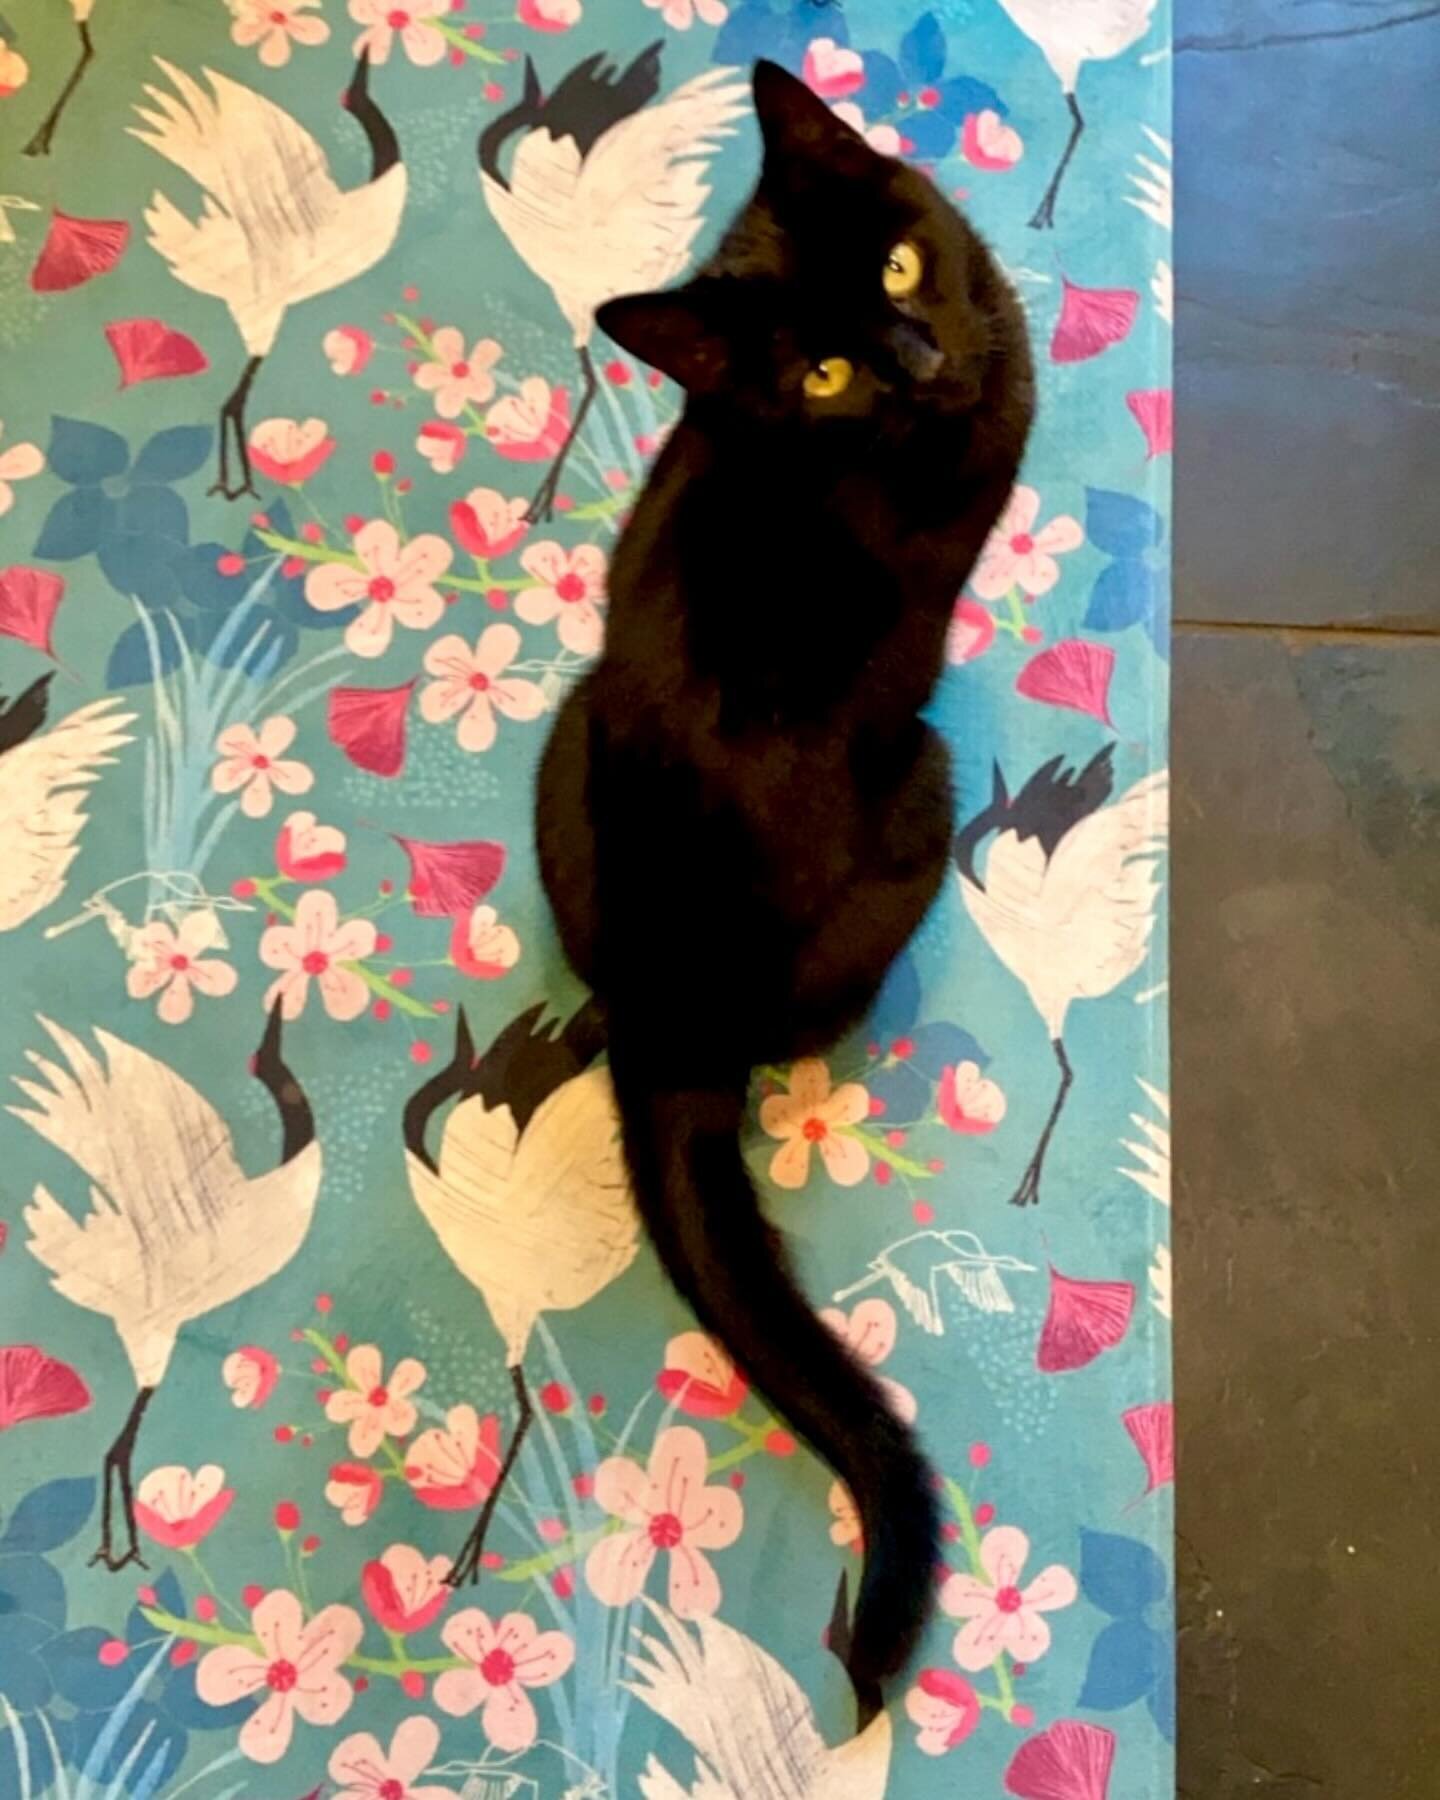 If there&rsquo;s something on the floor, Minxy&rsquo;s going to sit on or in it. 🐈&zwj;⬛ 

New rug and runner designs are inbound! They are super popular and I for one can vouch for how fabulous they are - a quick hoover, and they come up a treat! 
